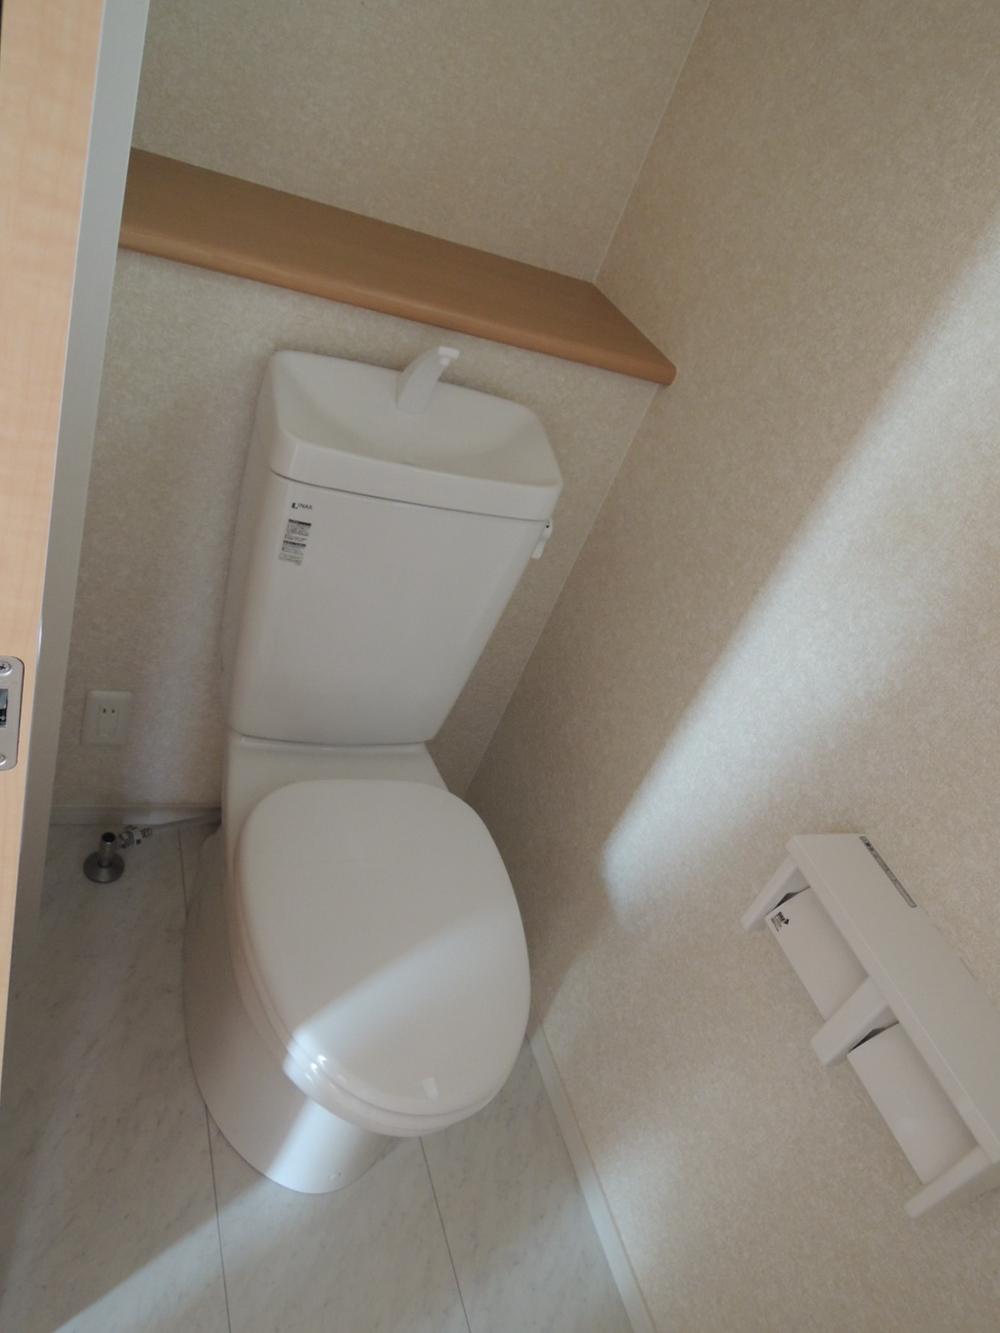 Other Equipment. Bidet function marked with toilet. 